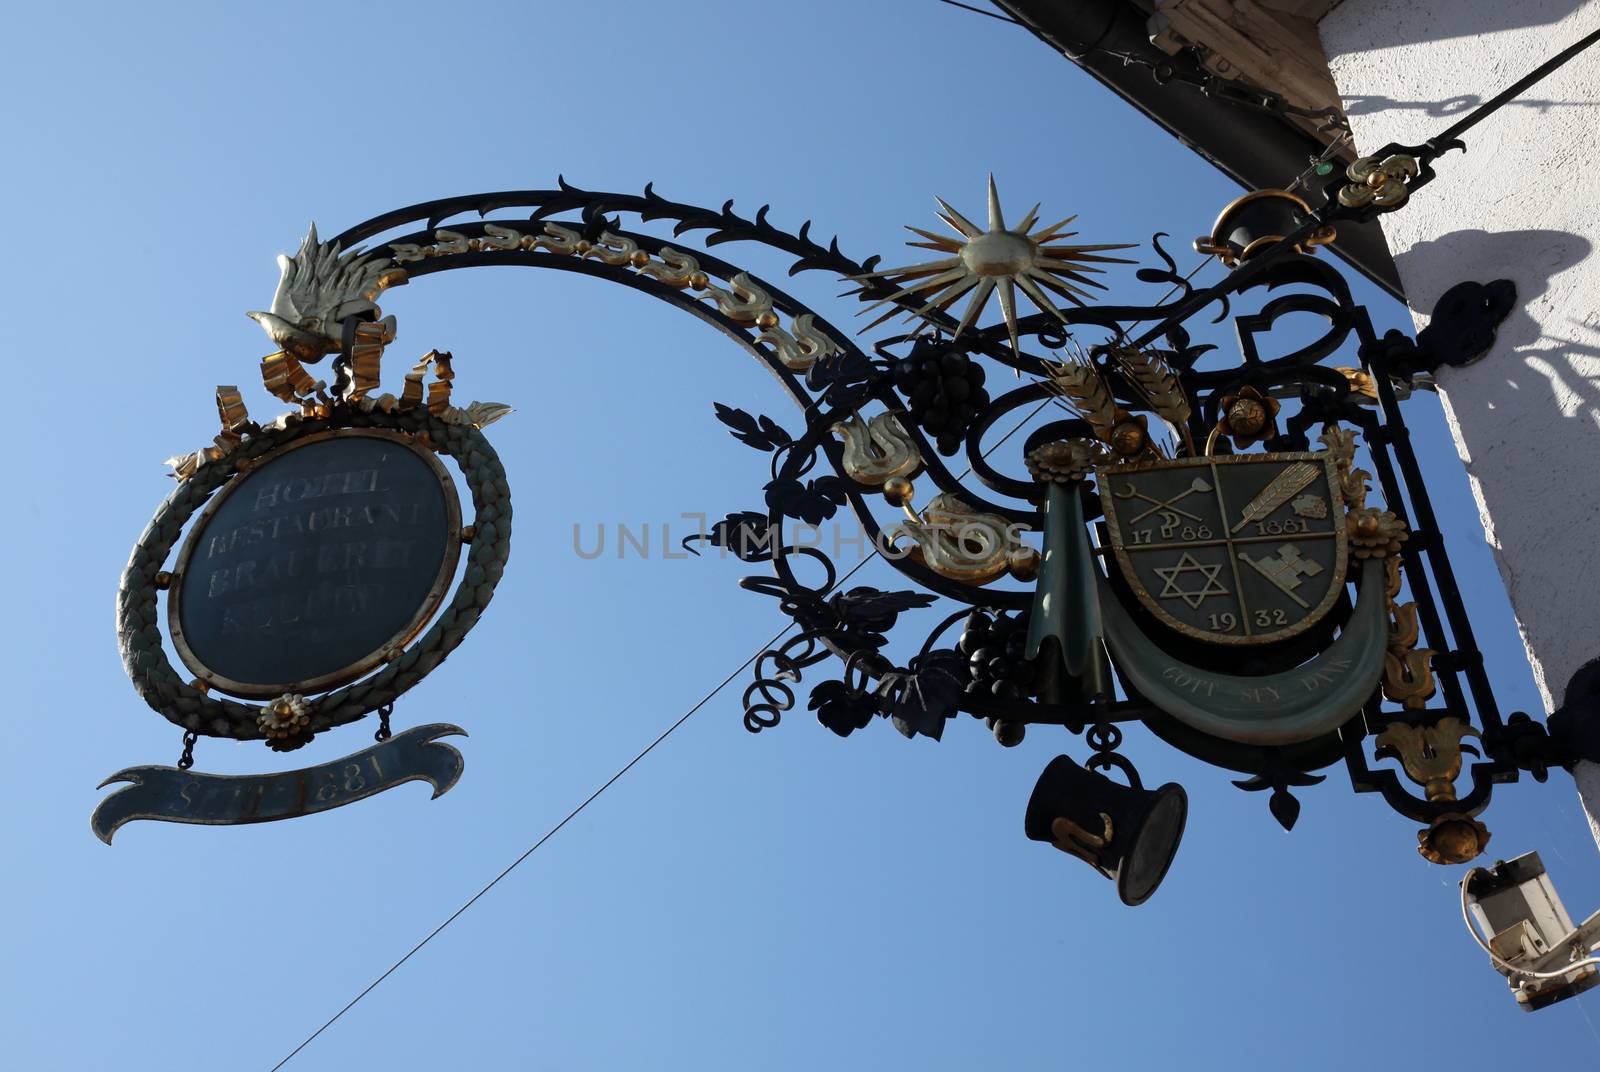 Old sign for an restaurant in the old town of Miltenberg, Germany by atlas